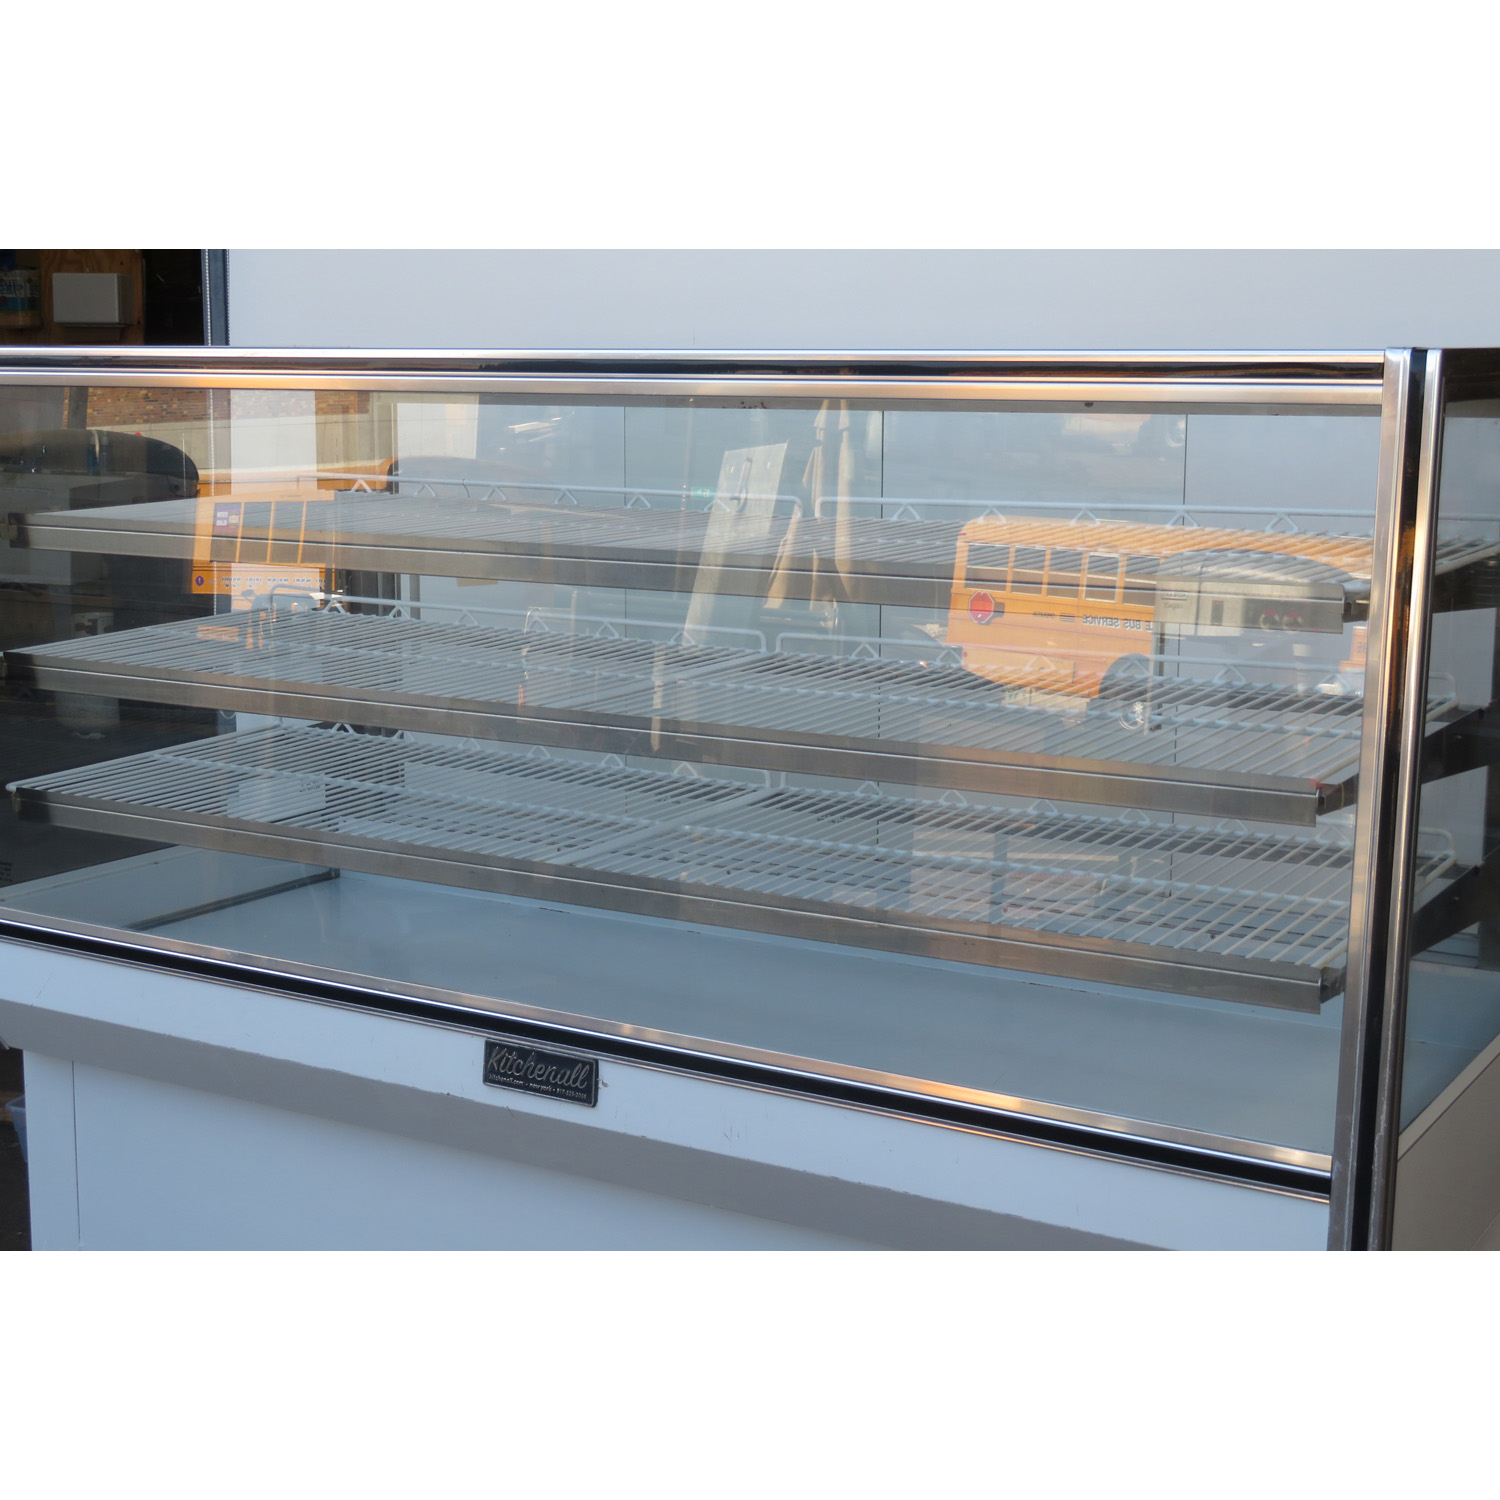 Leader HBK77D Bakery Dry Case 77'', Used Great Condition image 1